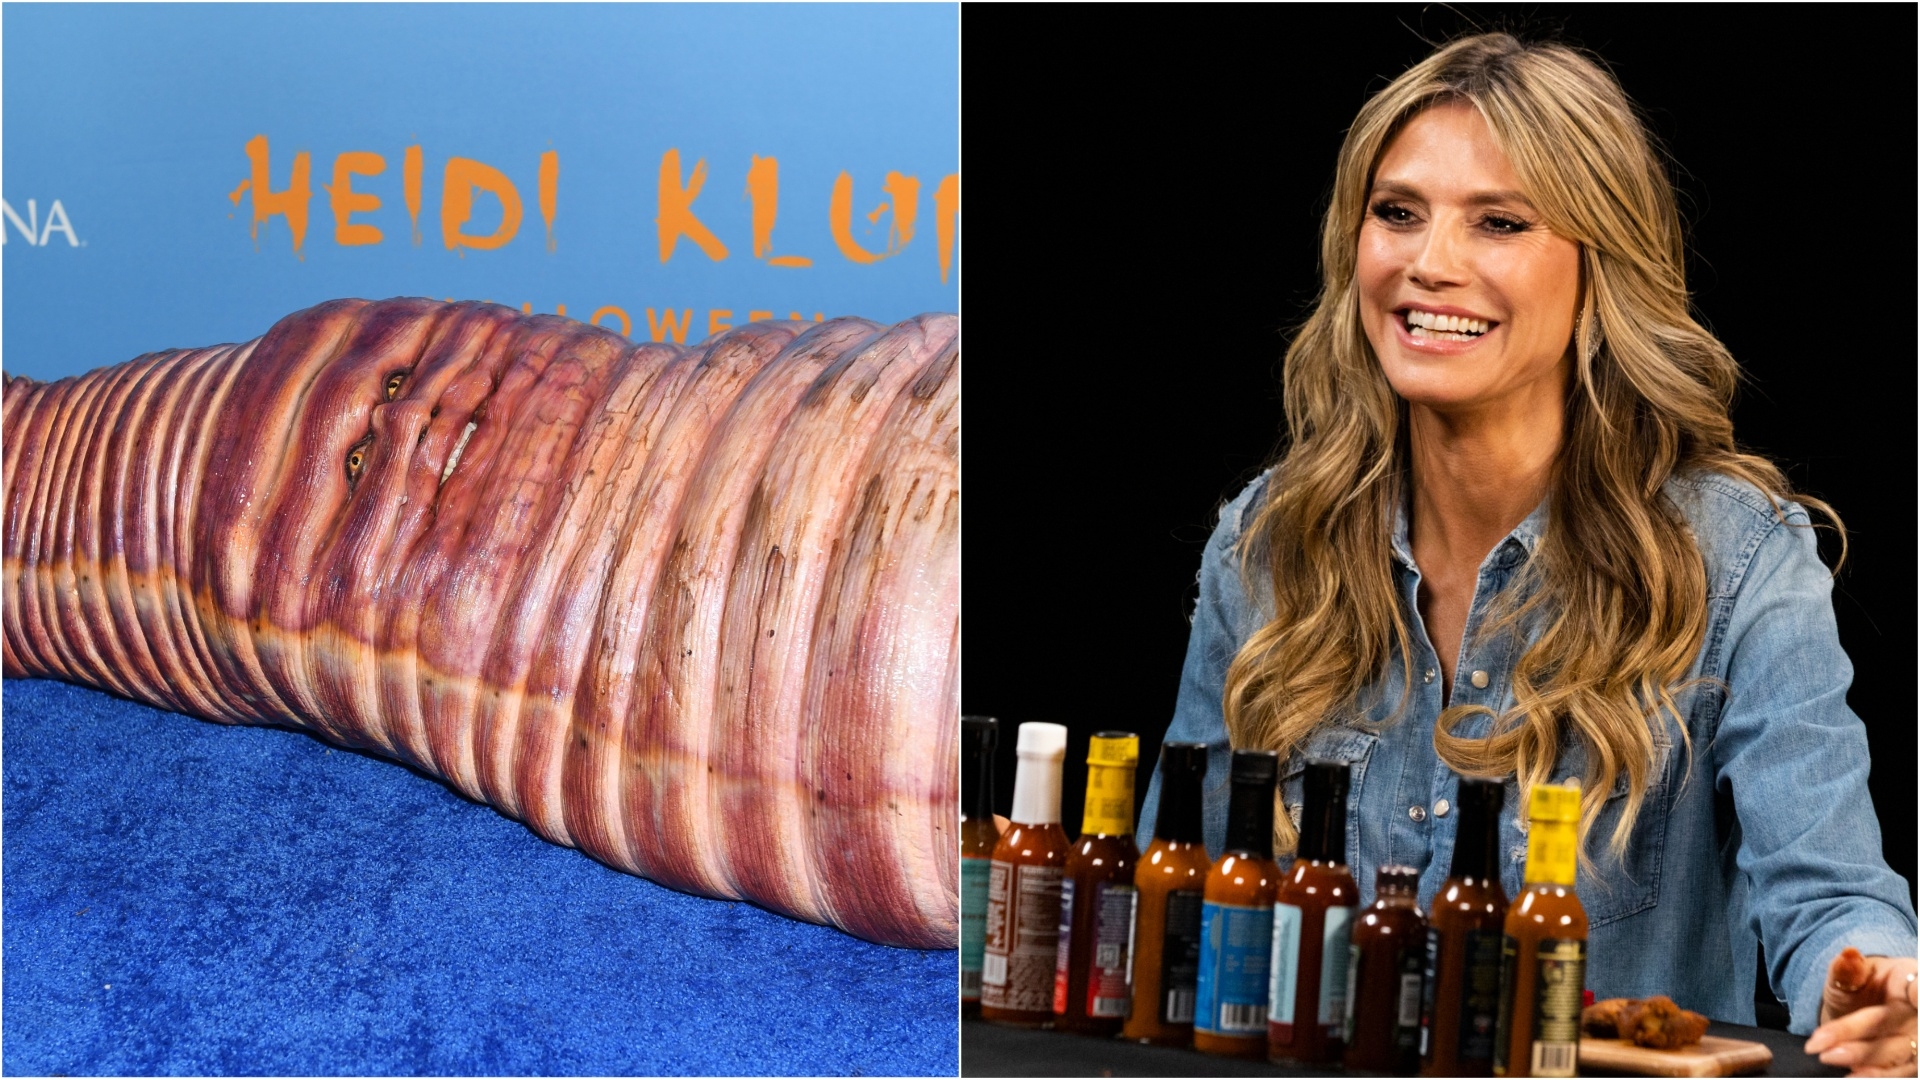 Heidi Klum on Hot Ones gives us exactly what we want: chat about her worm costume